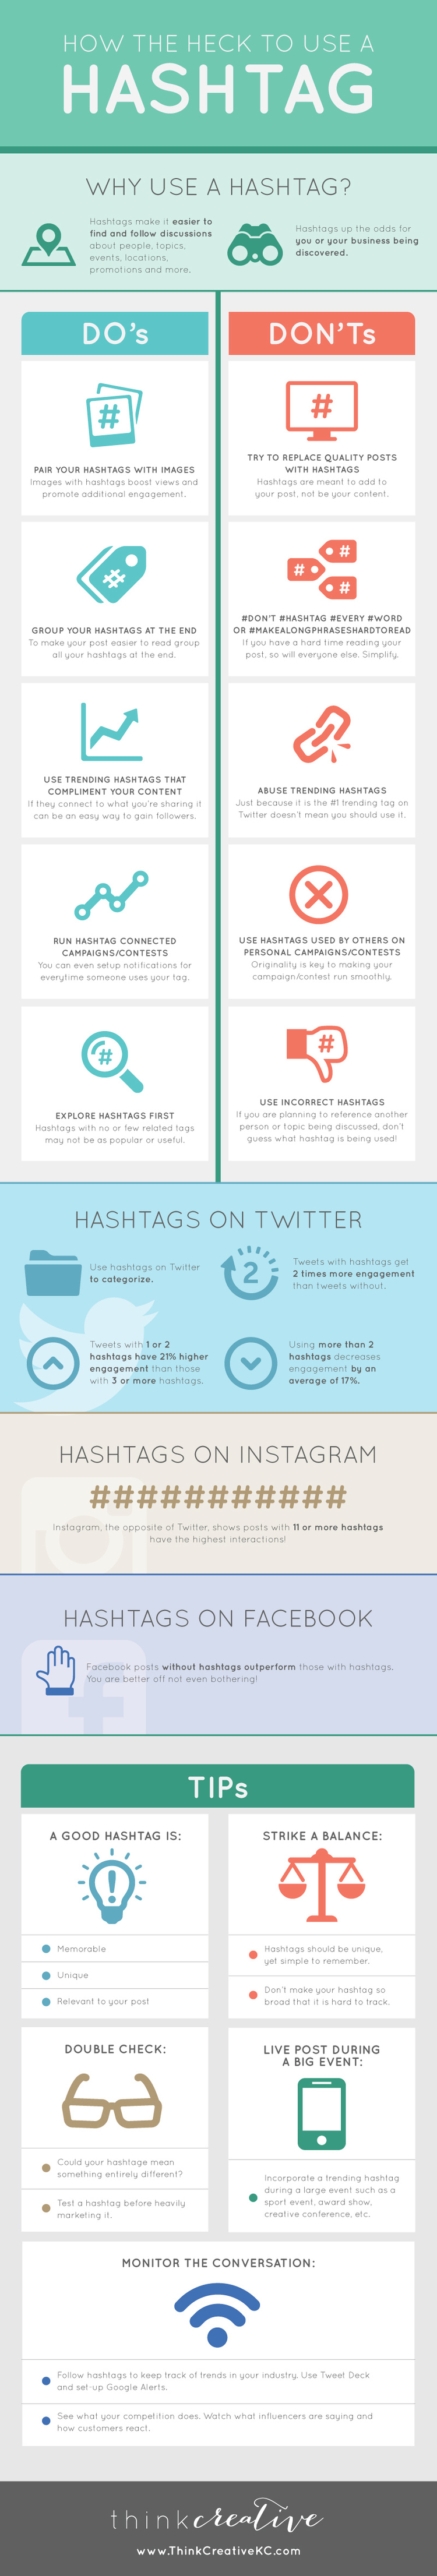 How the Heck to Use a Hashtag #Infographic | Think Creative